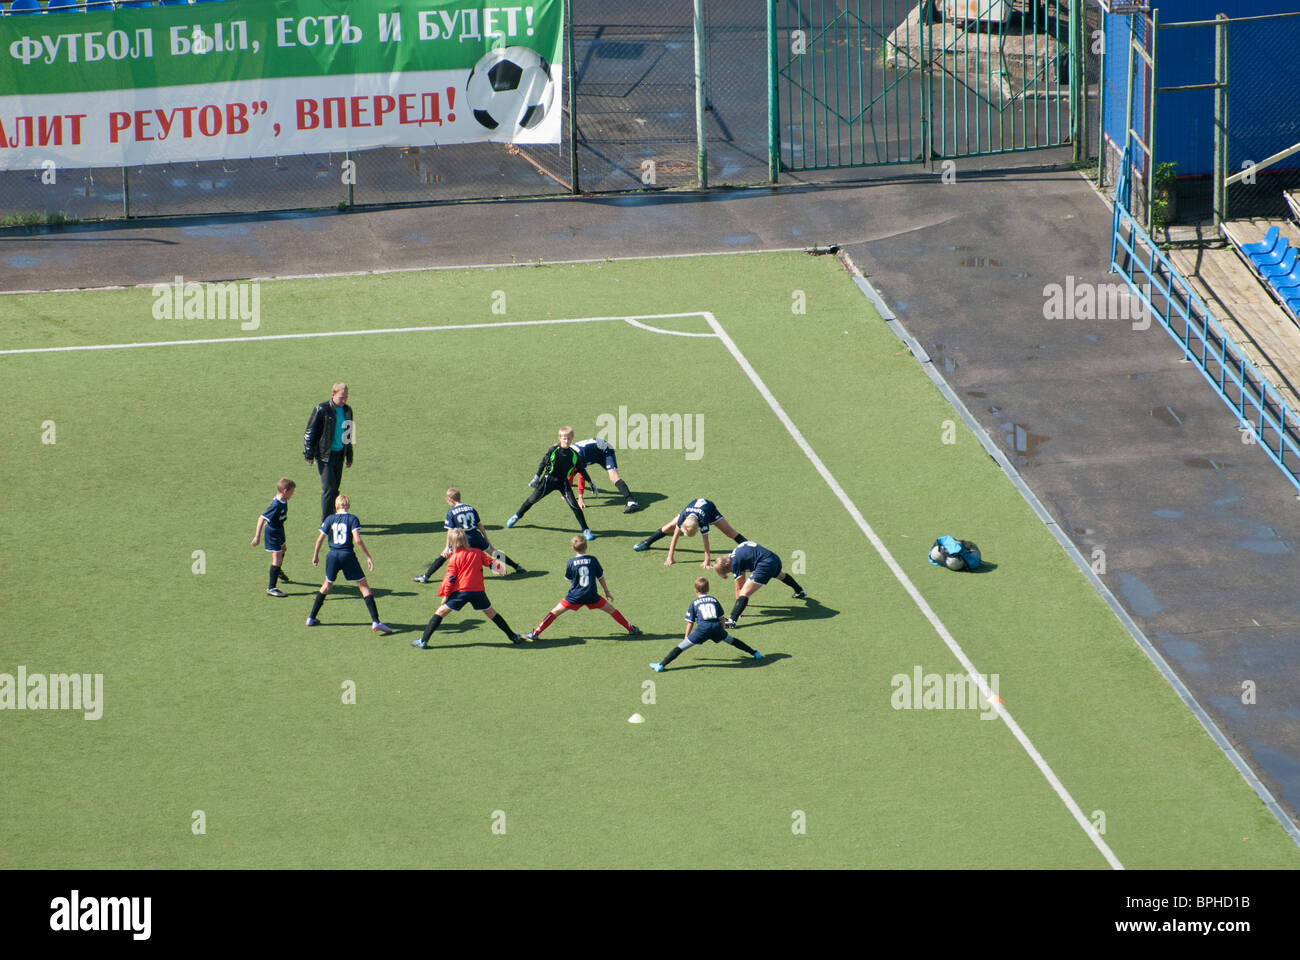 Training of Russian kids football team before a match Stock Photo